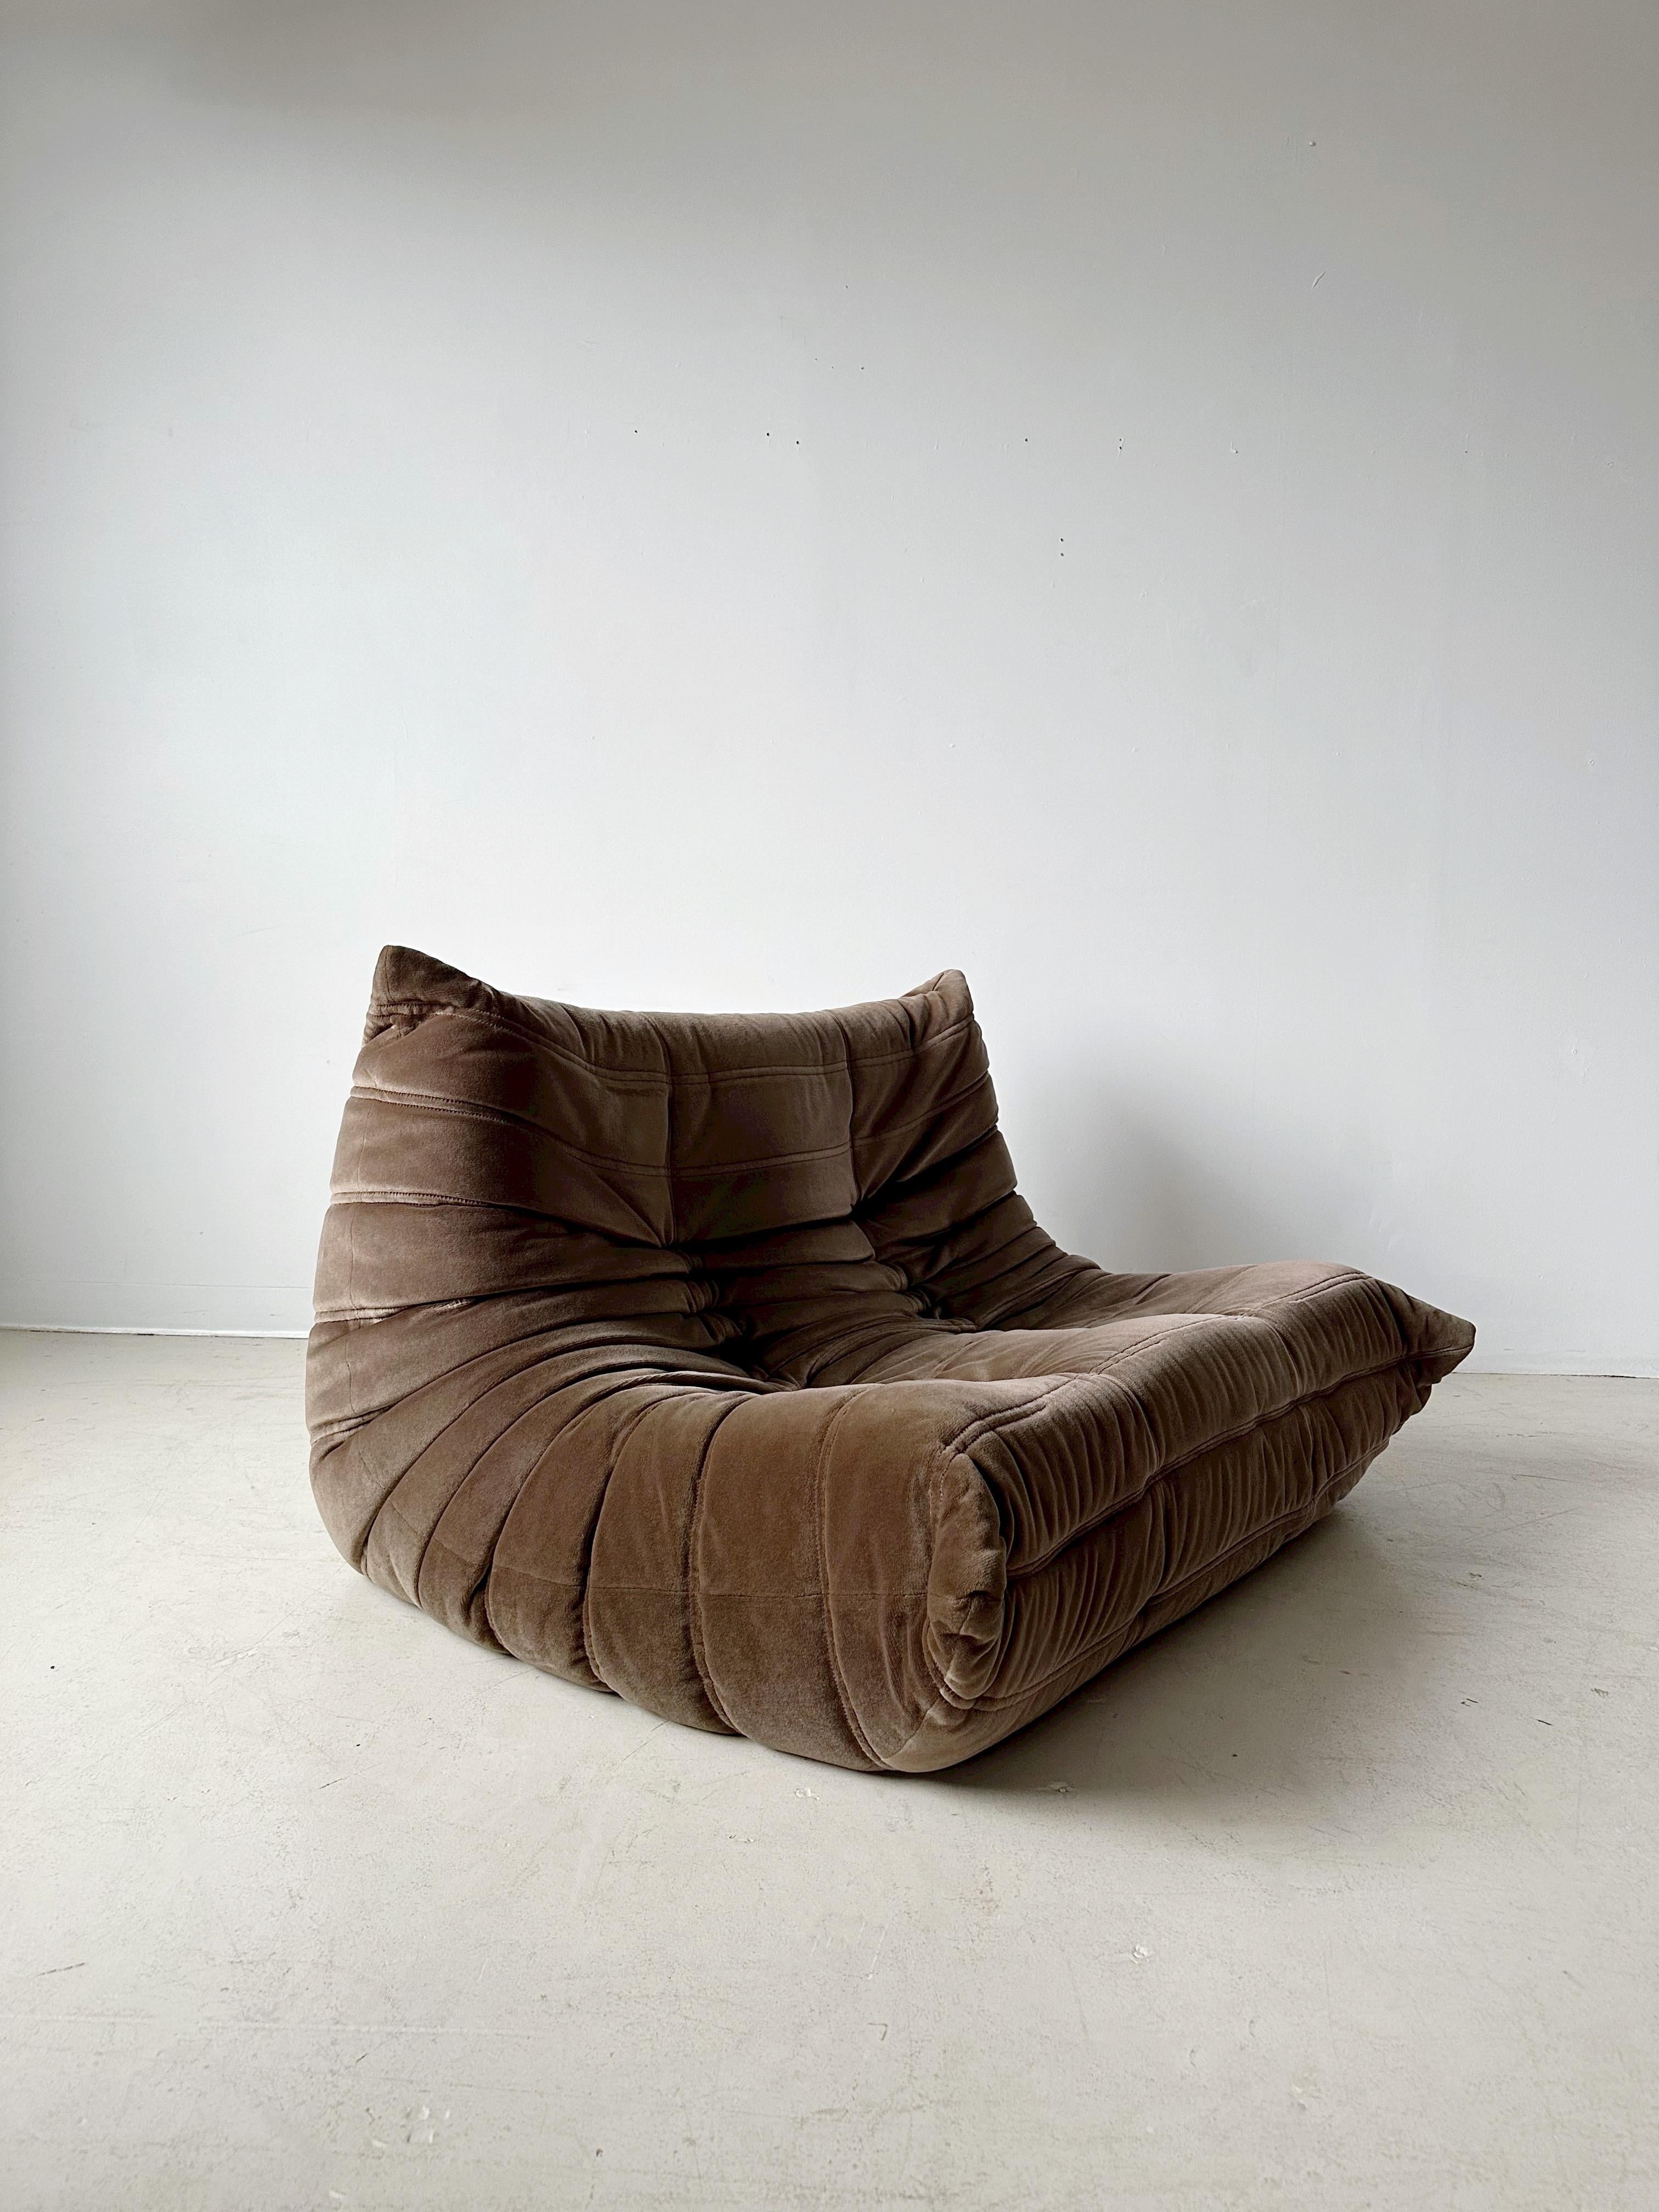 Vintage Brown Velvet Togo Love Seat by Michel Ducaroy for Ligne Roset, manufactured by Airborne/Arconas Canada, 80's

Arconas was the licensed North American manufacturer of Ligne Roset for a very brief period in the 80's. Original